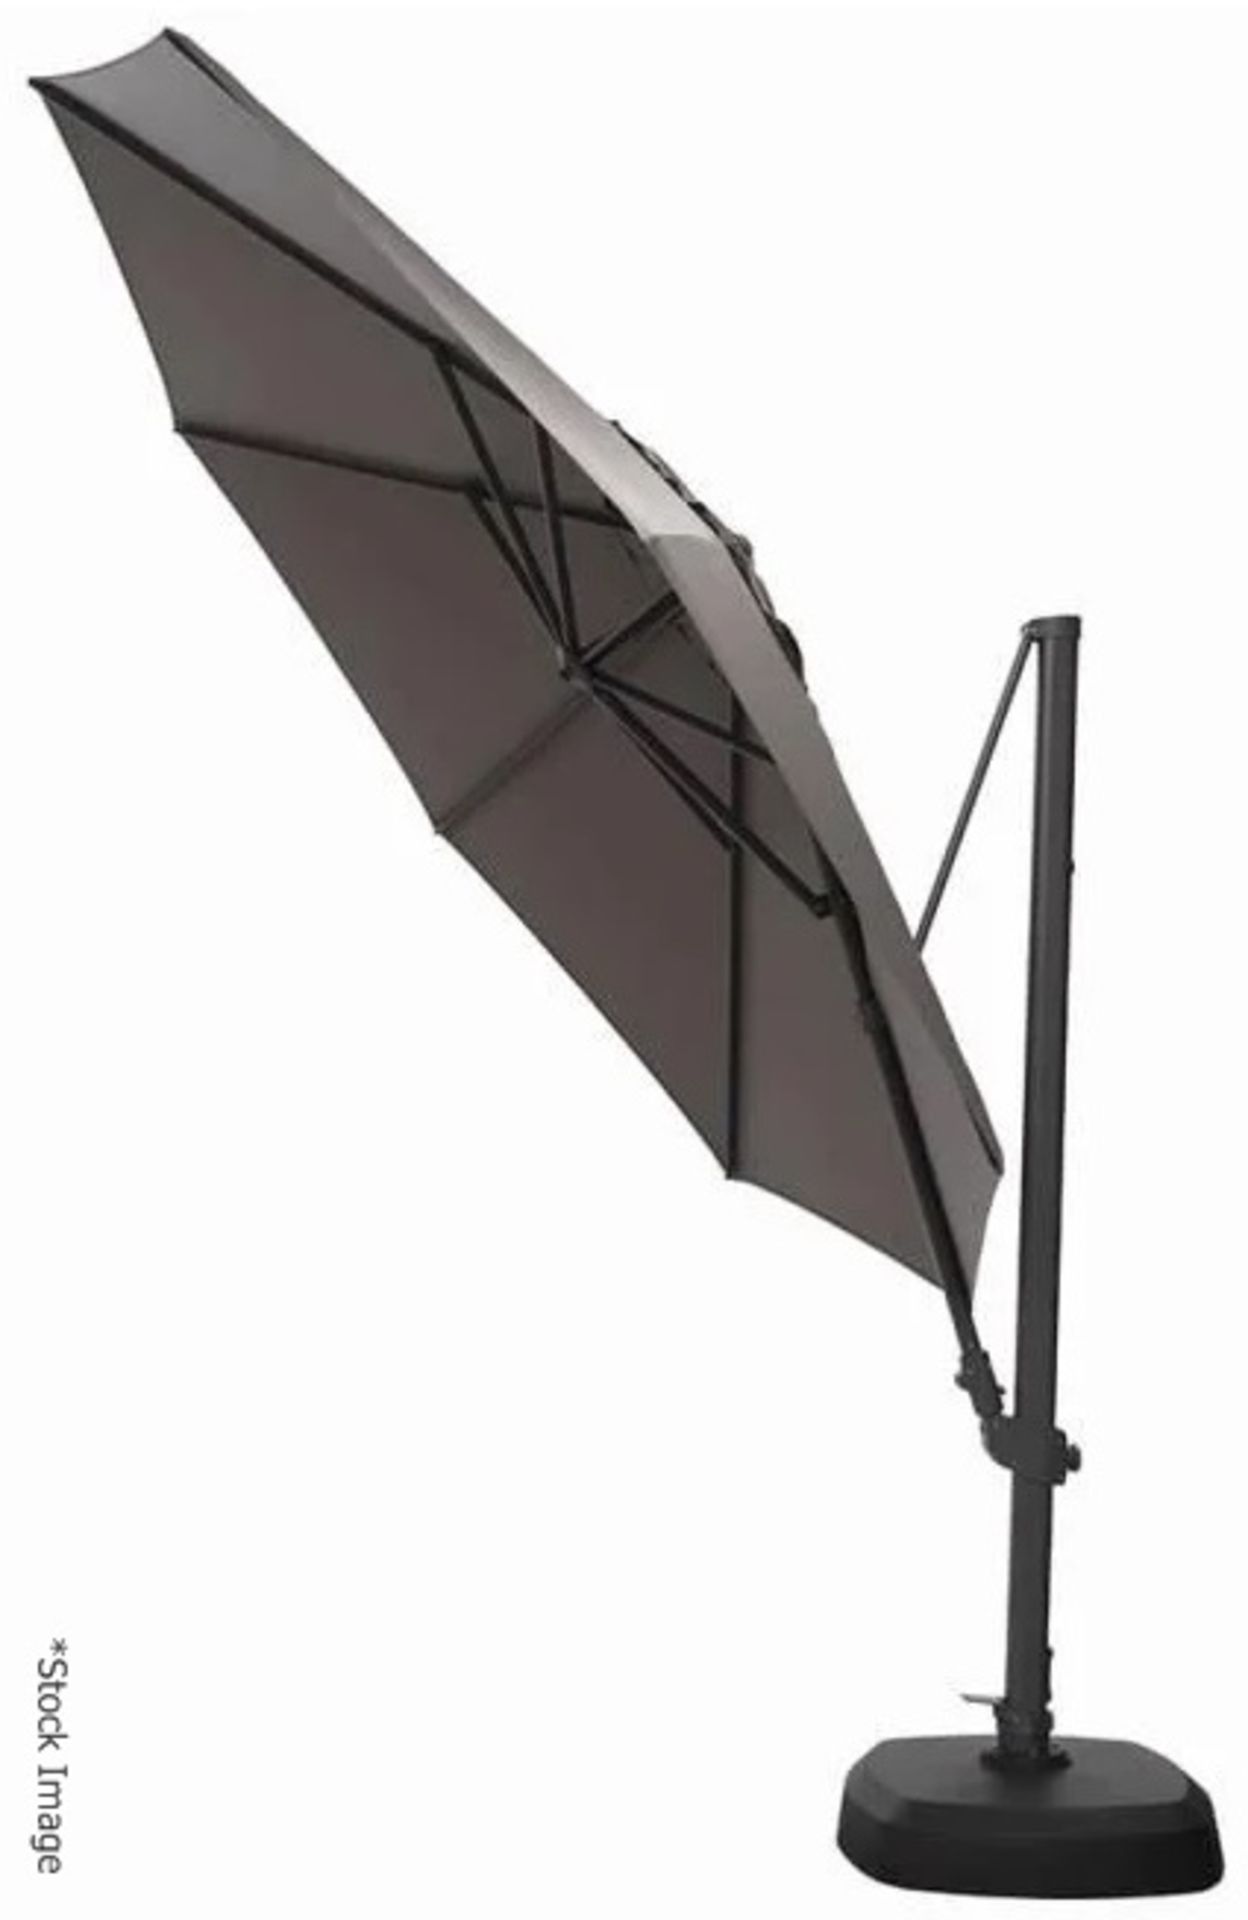 1 x Kettler 3.3m Free Arm Parasol With LED Lights and Bluetooth Speaker - New/Boxed - RRP: £769.99 - Image 4 of 6